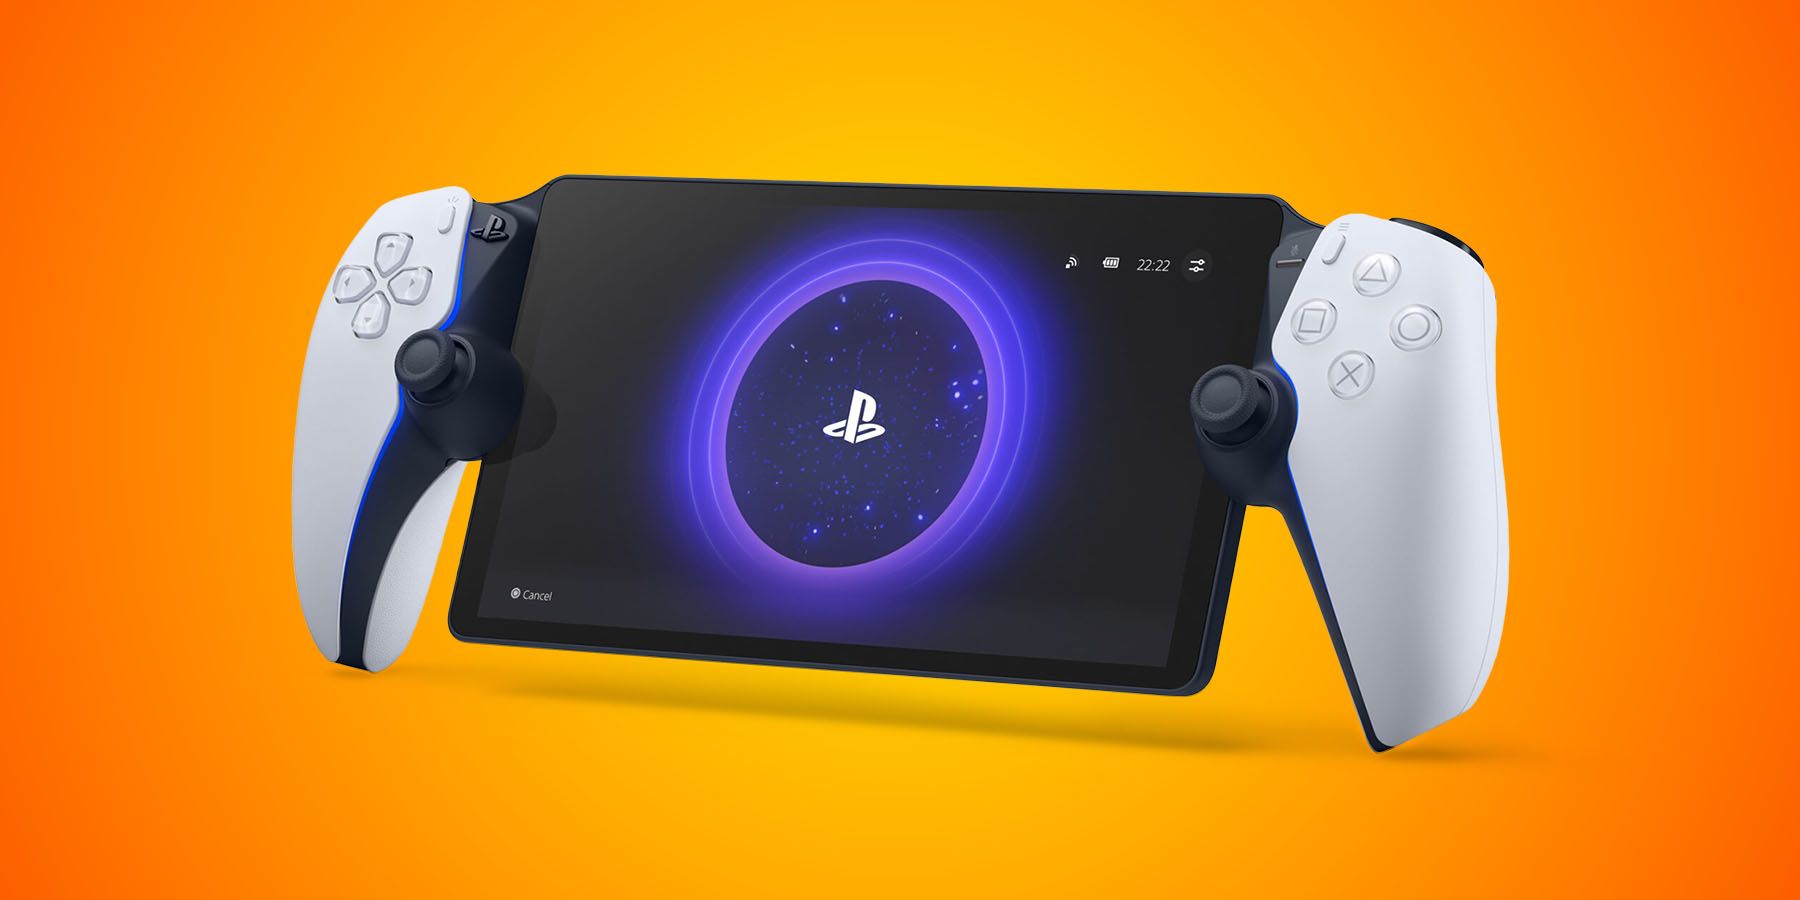 PlayStation 5 price and release date finally announced